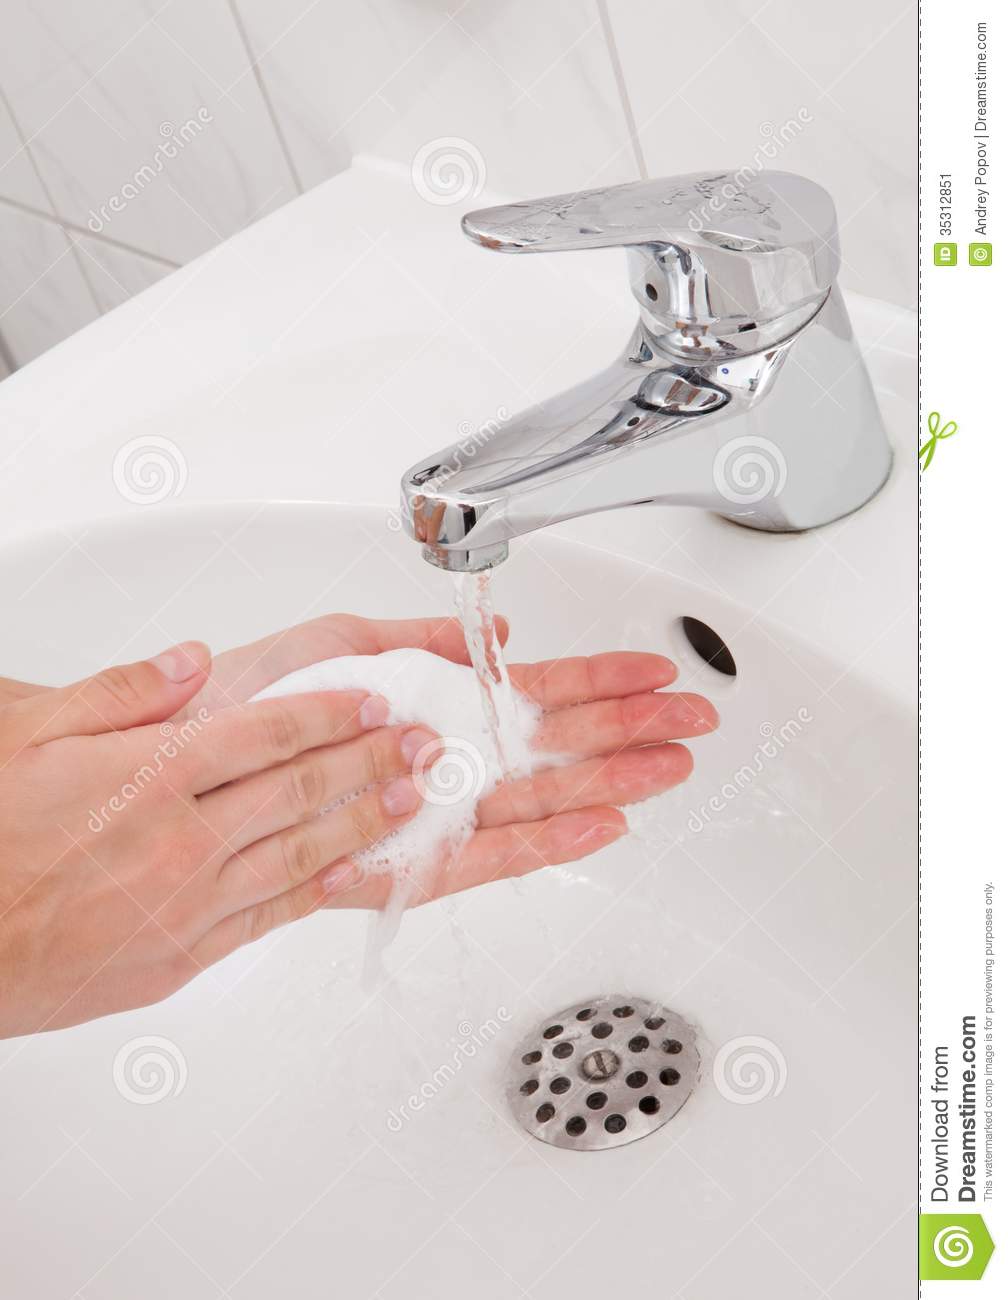 Human Hands Being Washed Under Faucet Stock Image   Image  35312851